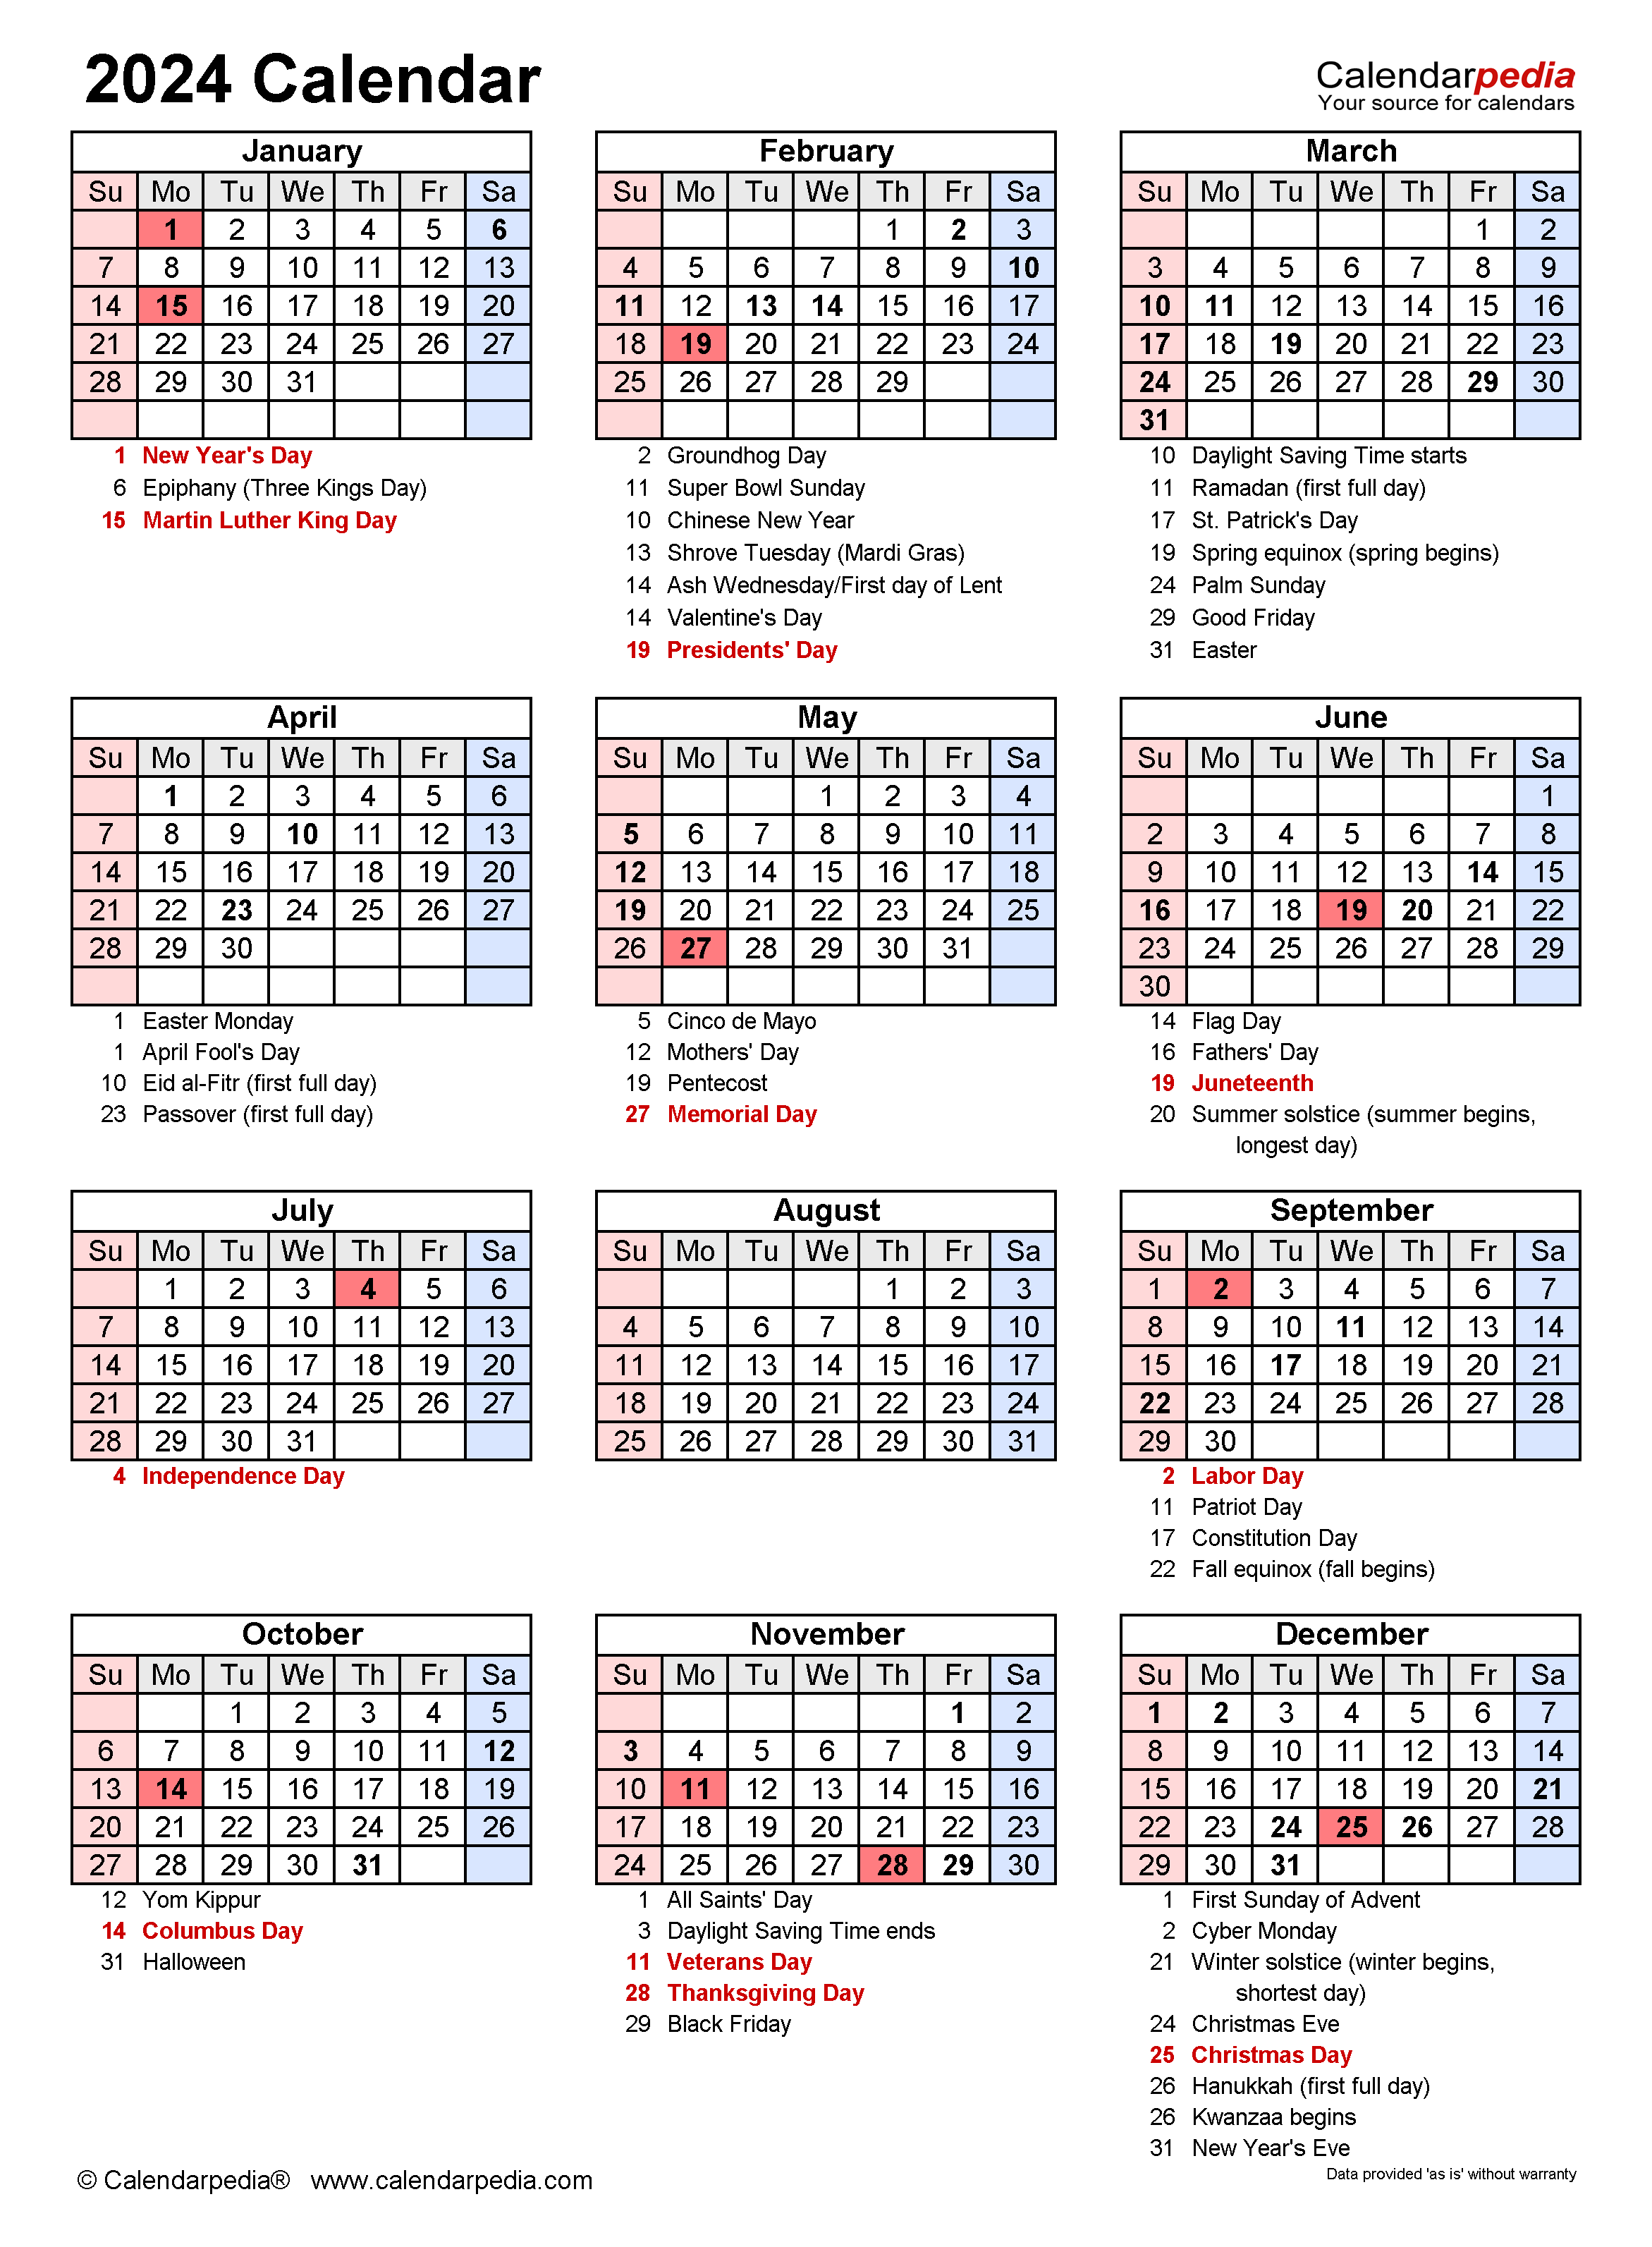 2024 Calendar Free Printable PDF Templates Calendarpedia - Free Printable 2024 Calendar 2months In Page With Holidays